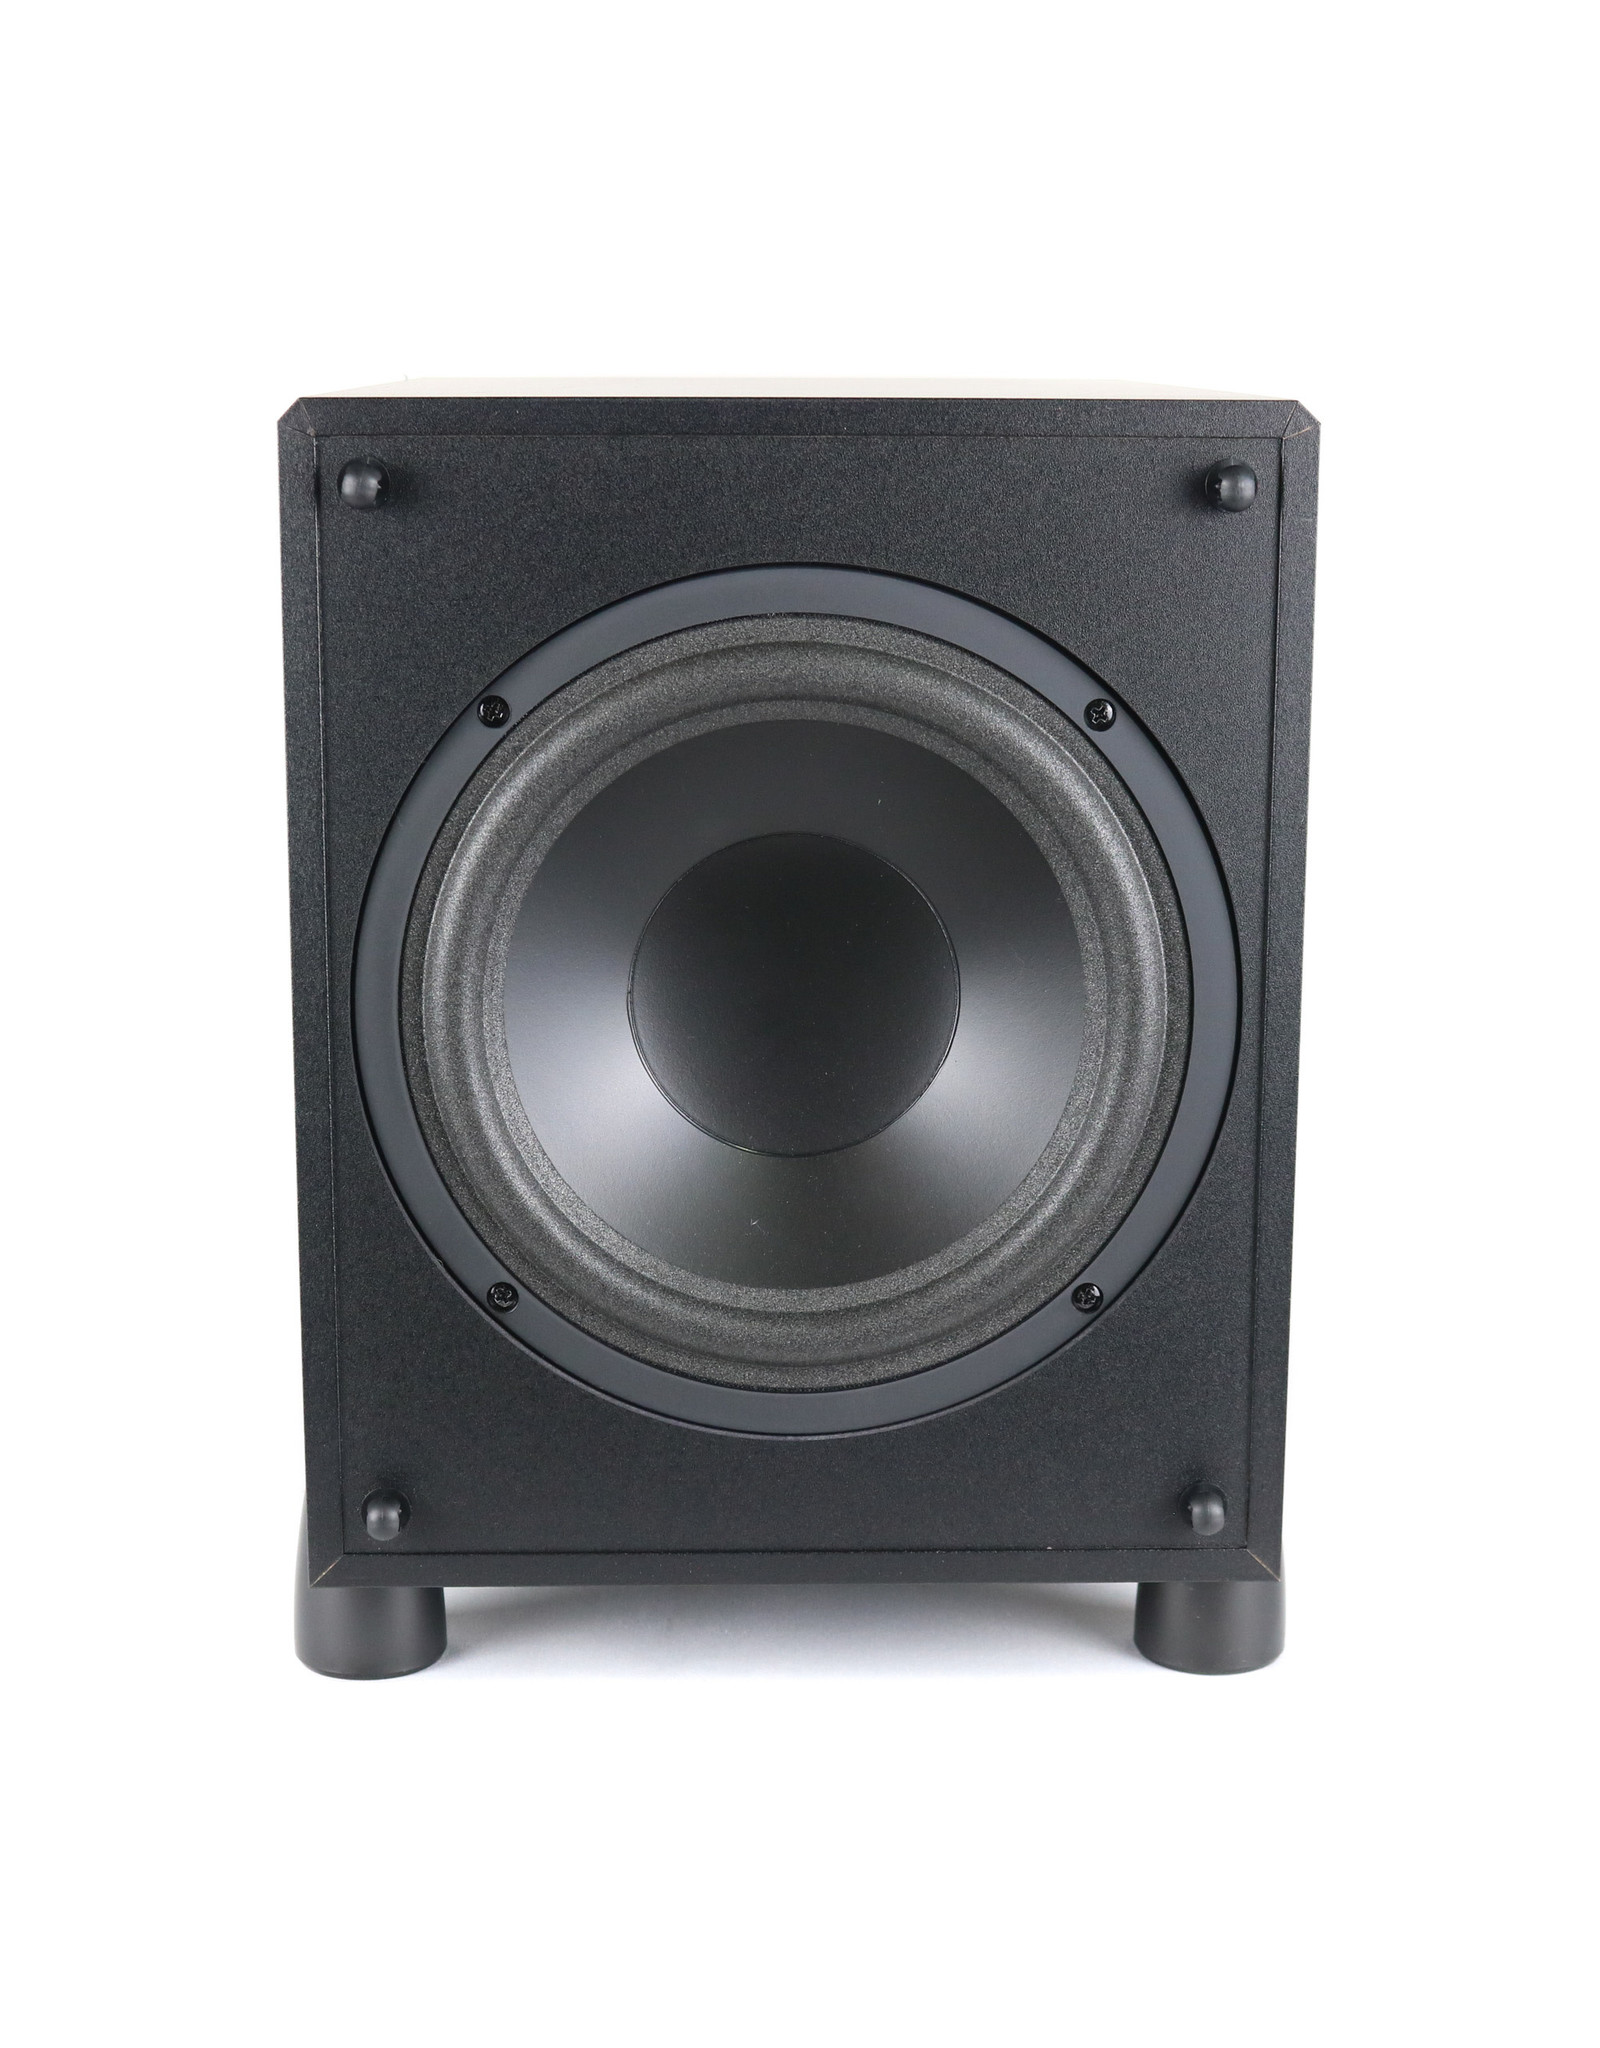 Def Tech Definitive Technology ProSub 800 Subwoofer USED